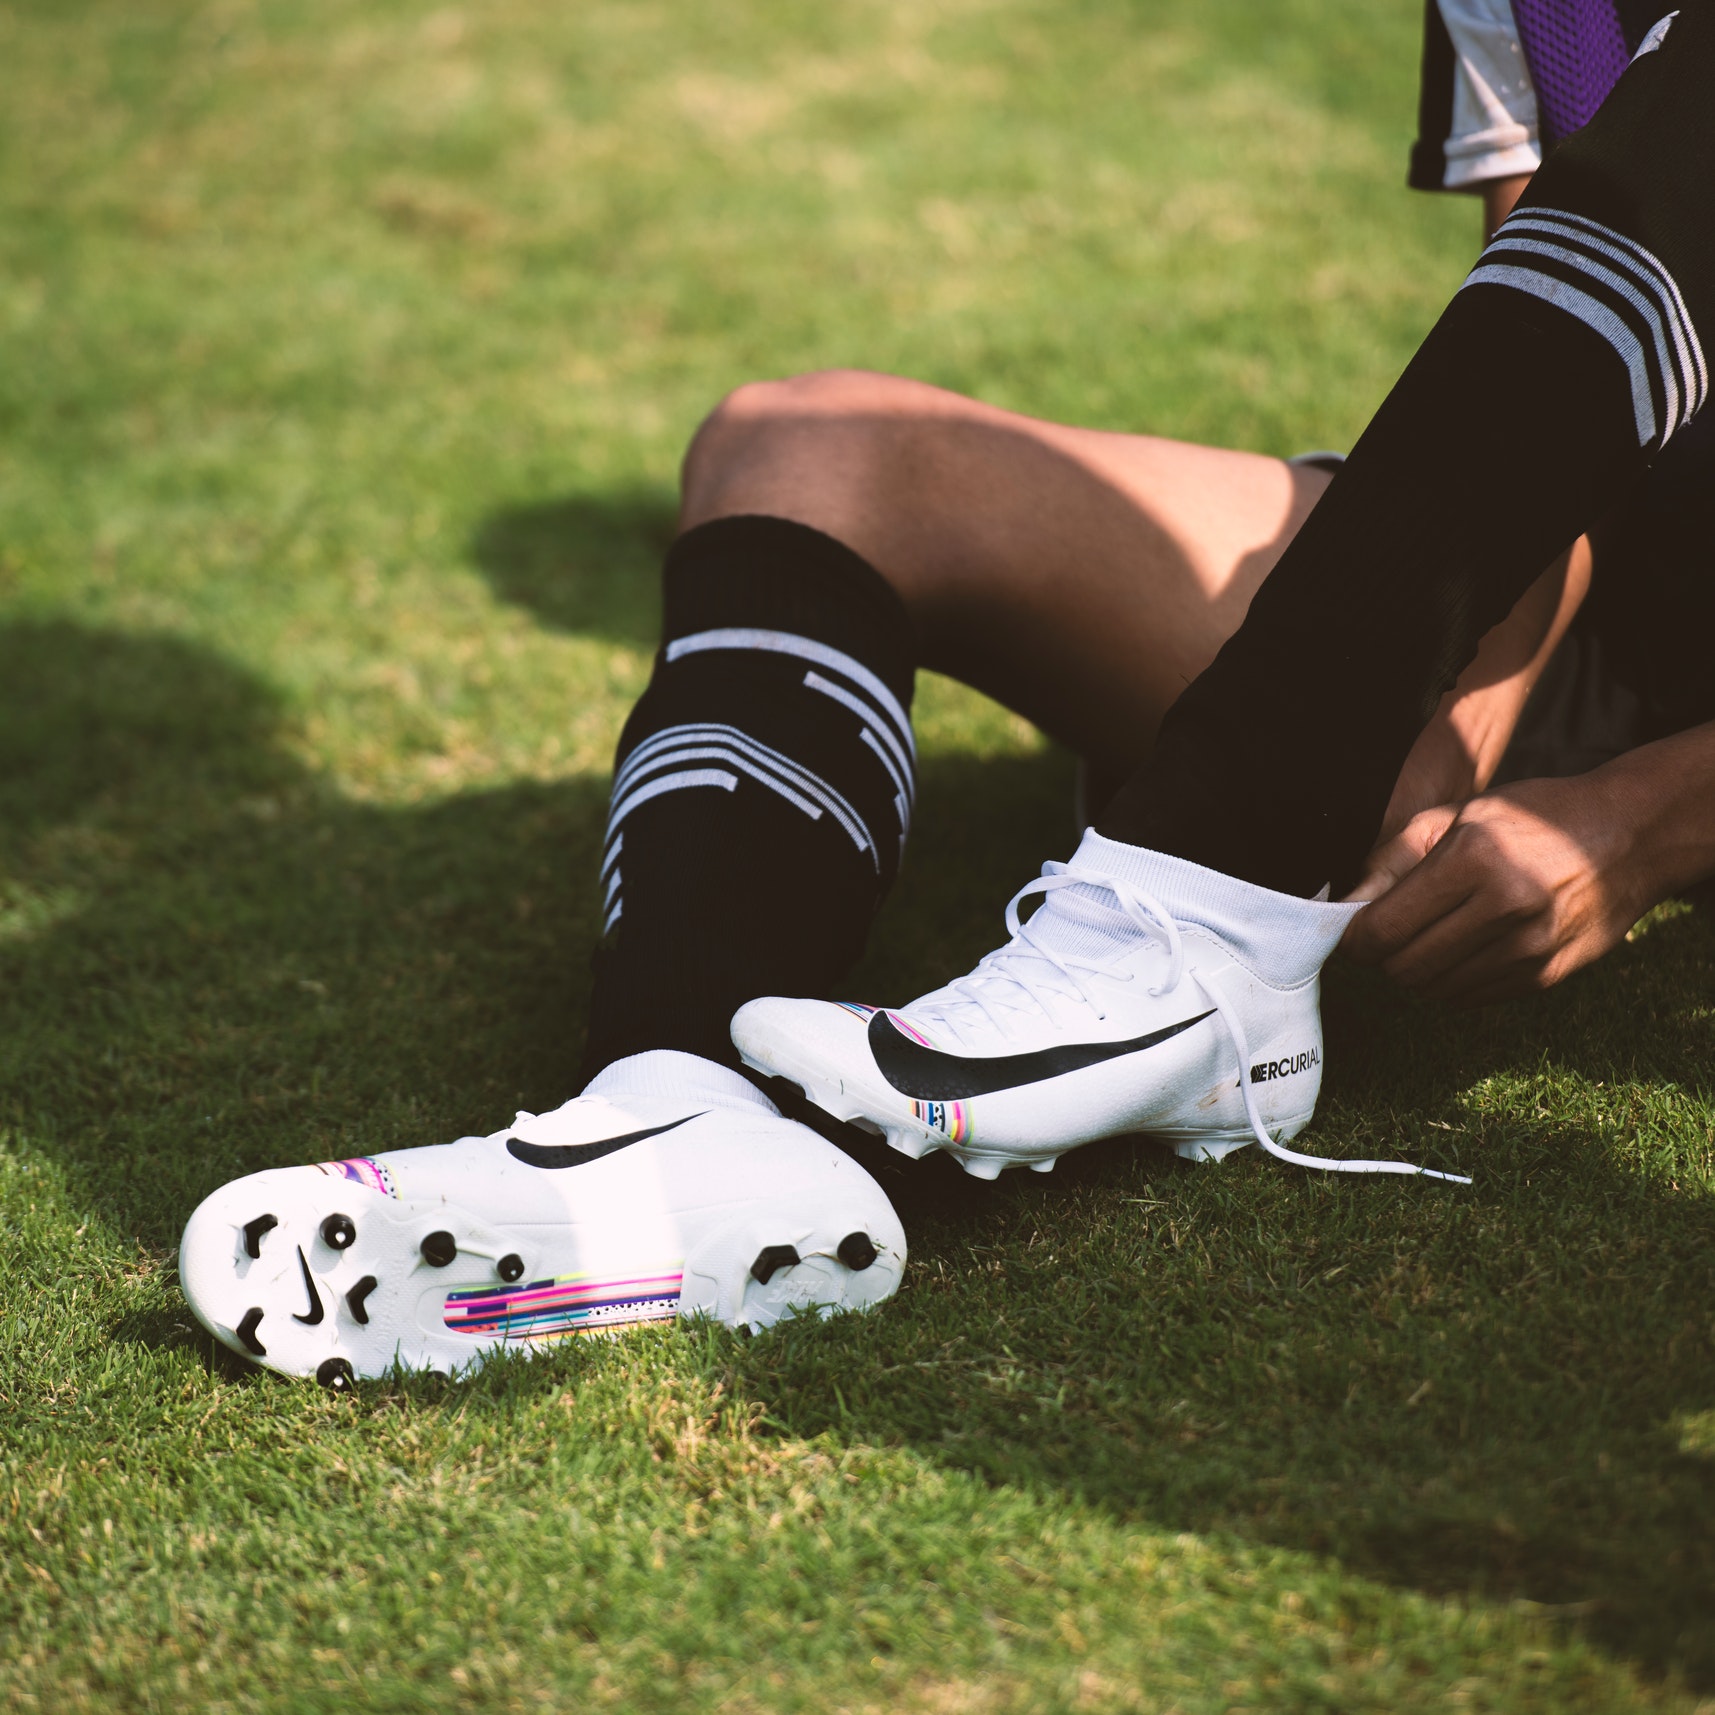 A soccer player puts on cleats